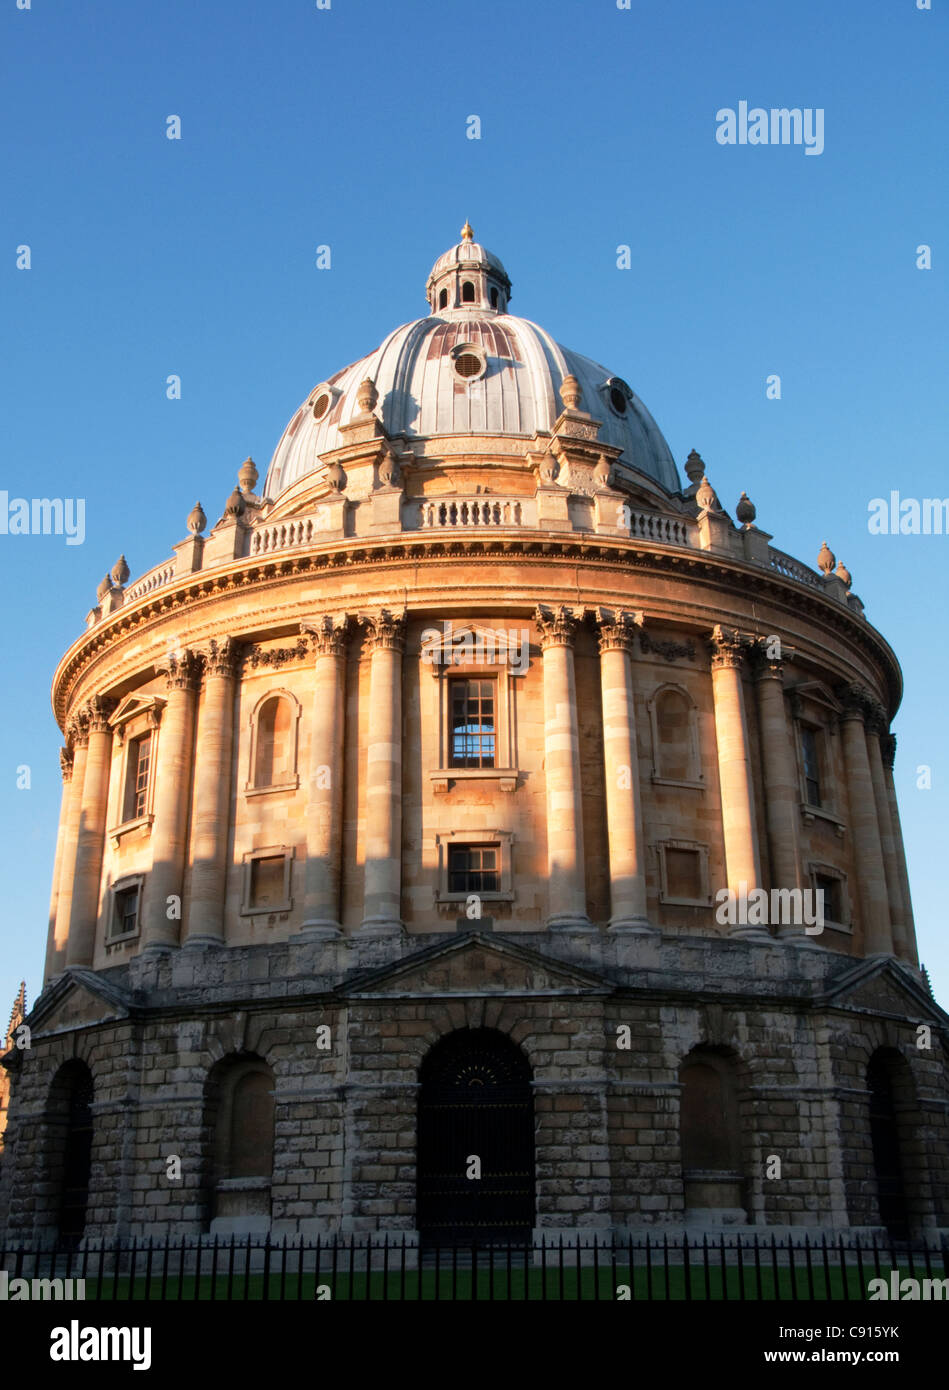 The Radcliffe Camera is a building in Oxford England designed by James Gibbs in the English Baroque style and built in Stock Photo